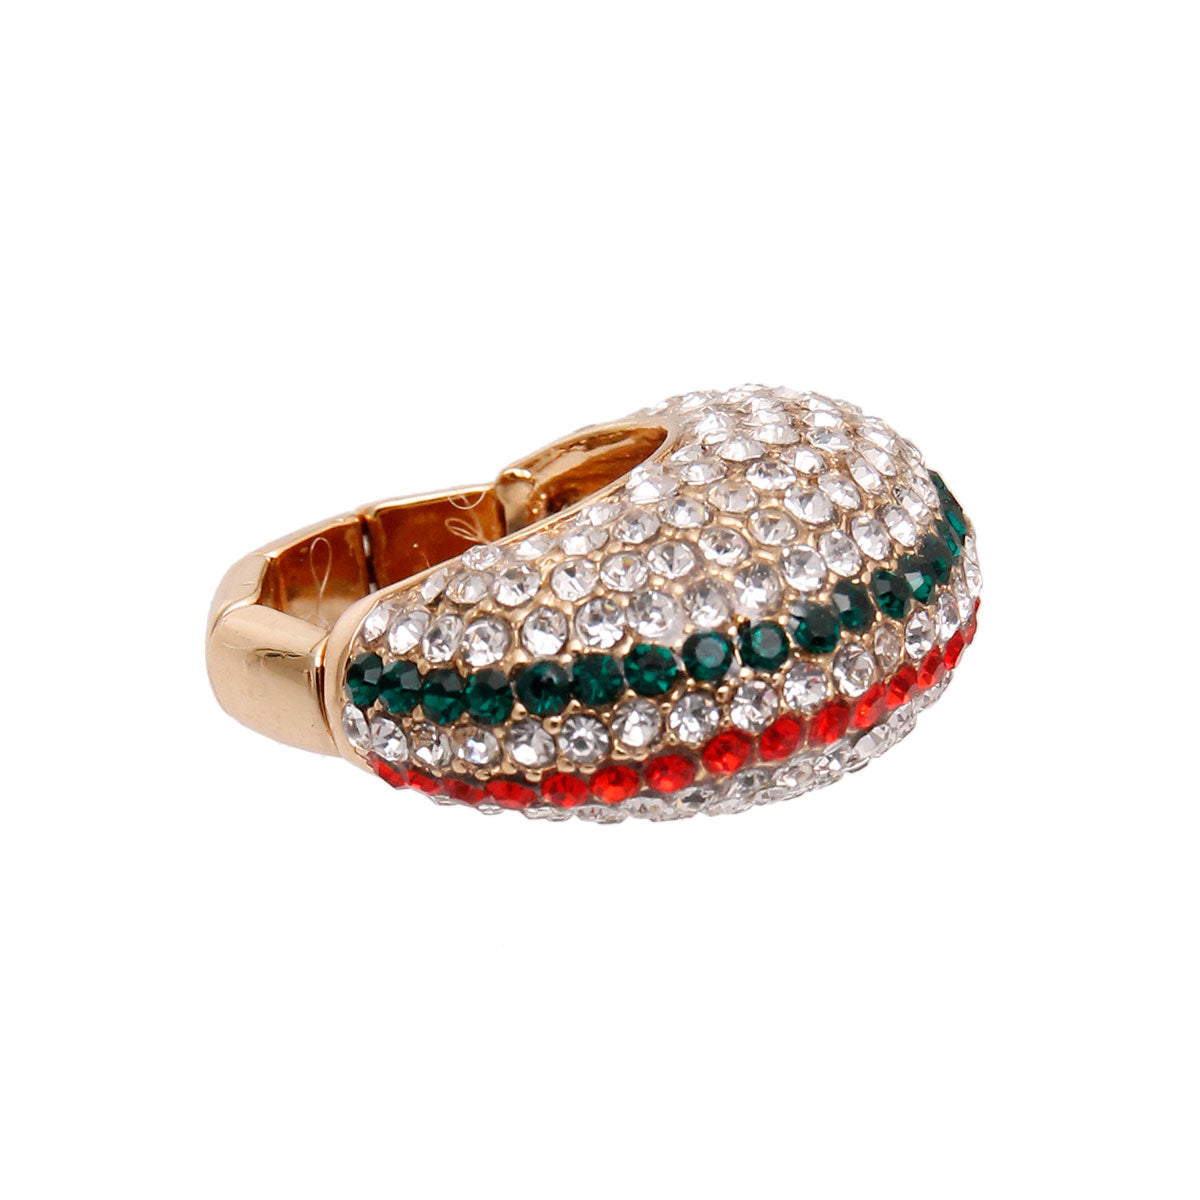 Designer Style Rounded Cocktail Ring